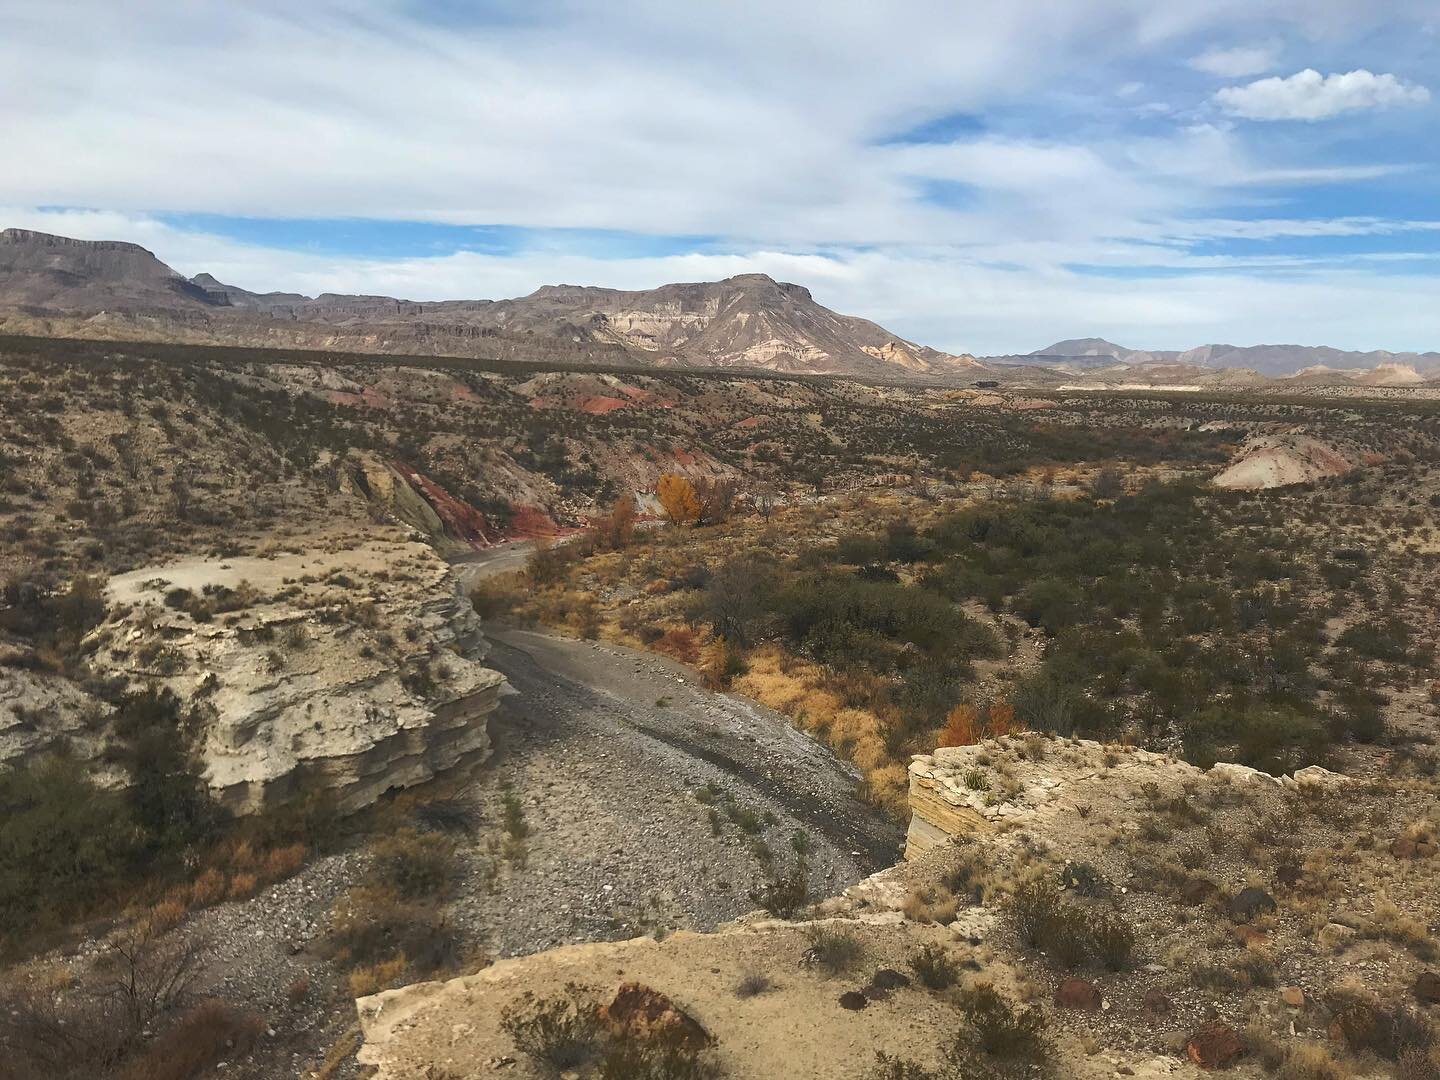 The dry creek is calling my name&hellip;Gotta go! Share your hike for today!! #bigbendranchstatepark #rvlifestyle #exploremore #stateparks #arroyo #rvlifestyle